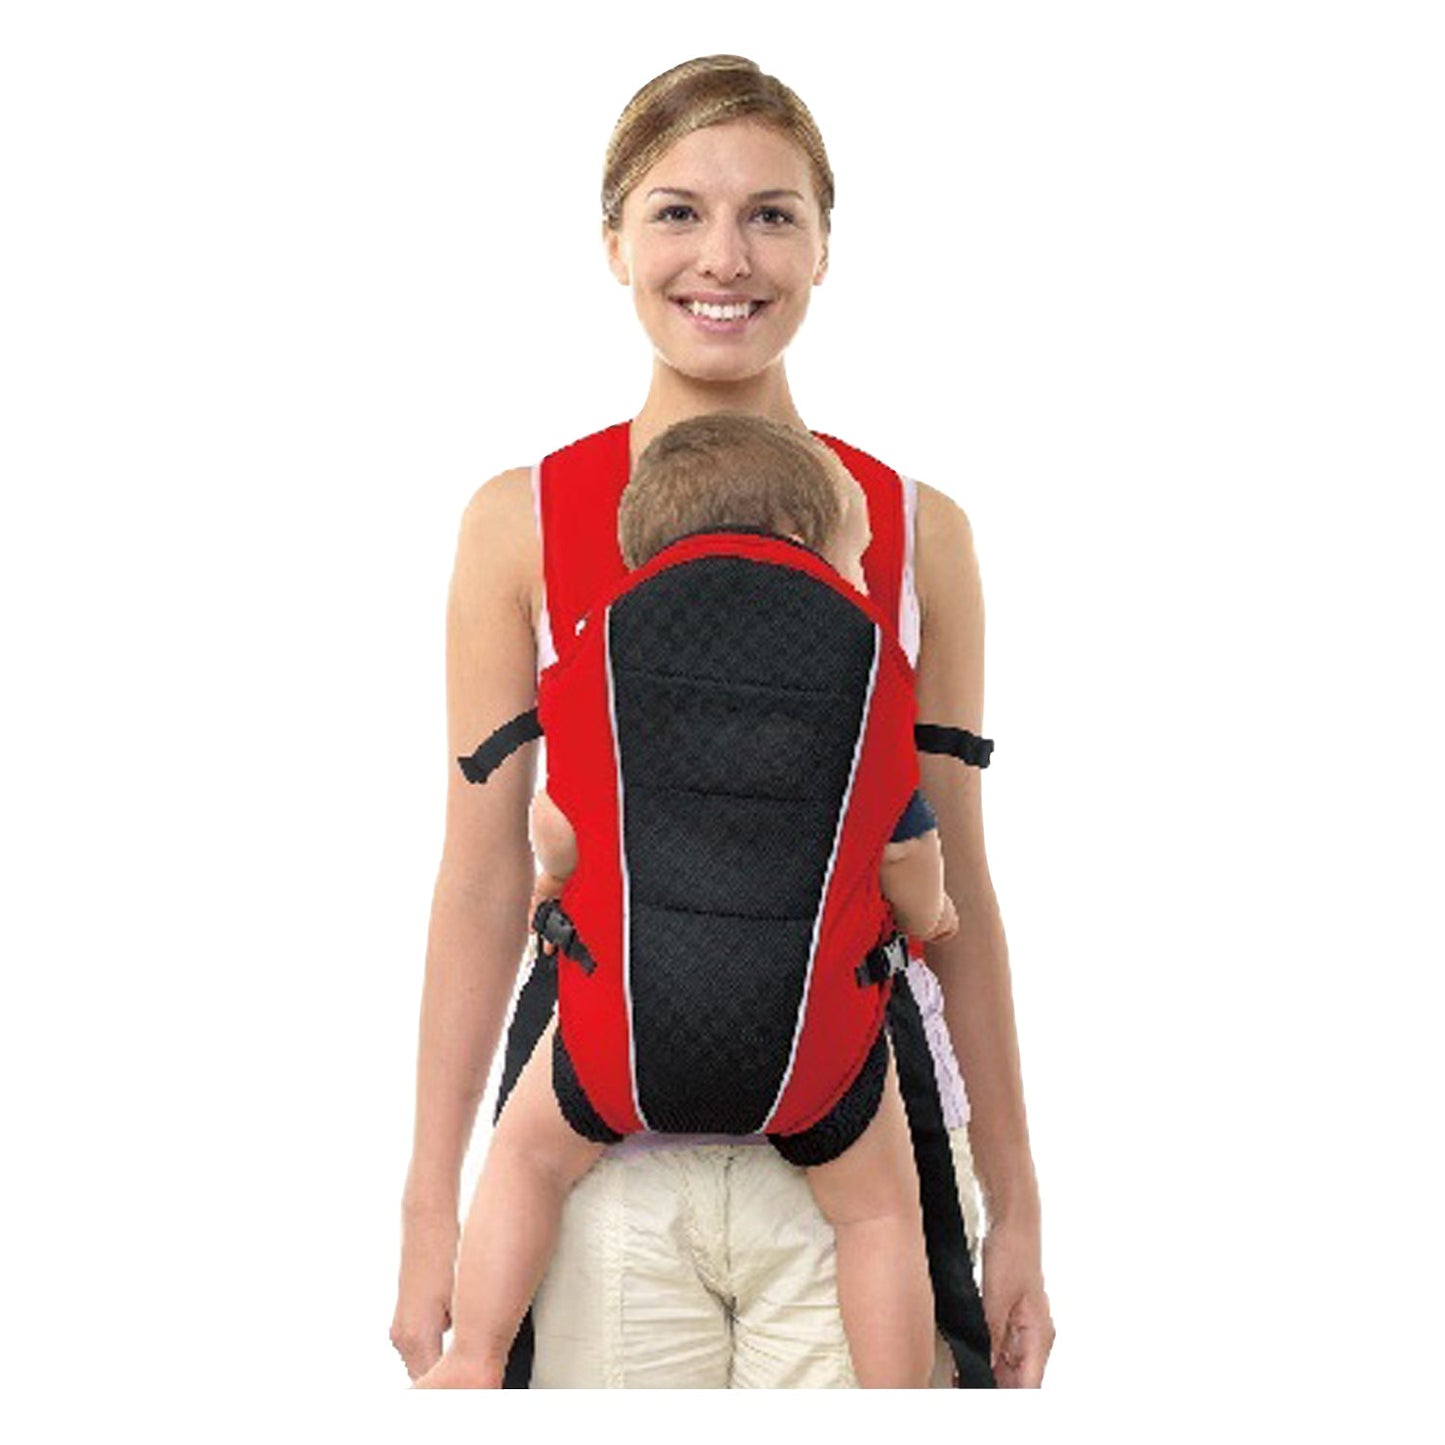 3-In-1 Baby Carrier(Without Packing)